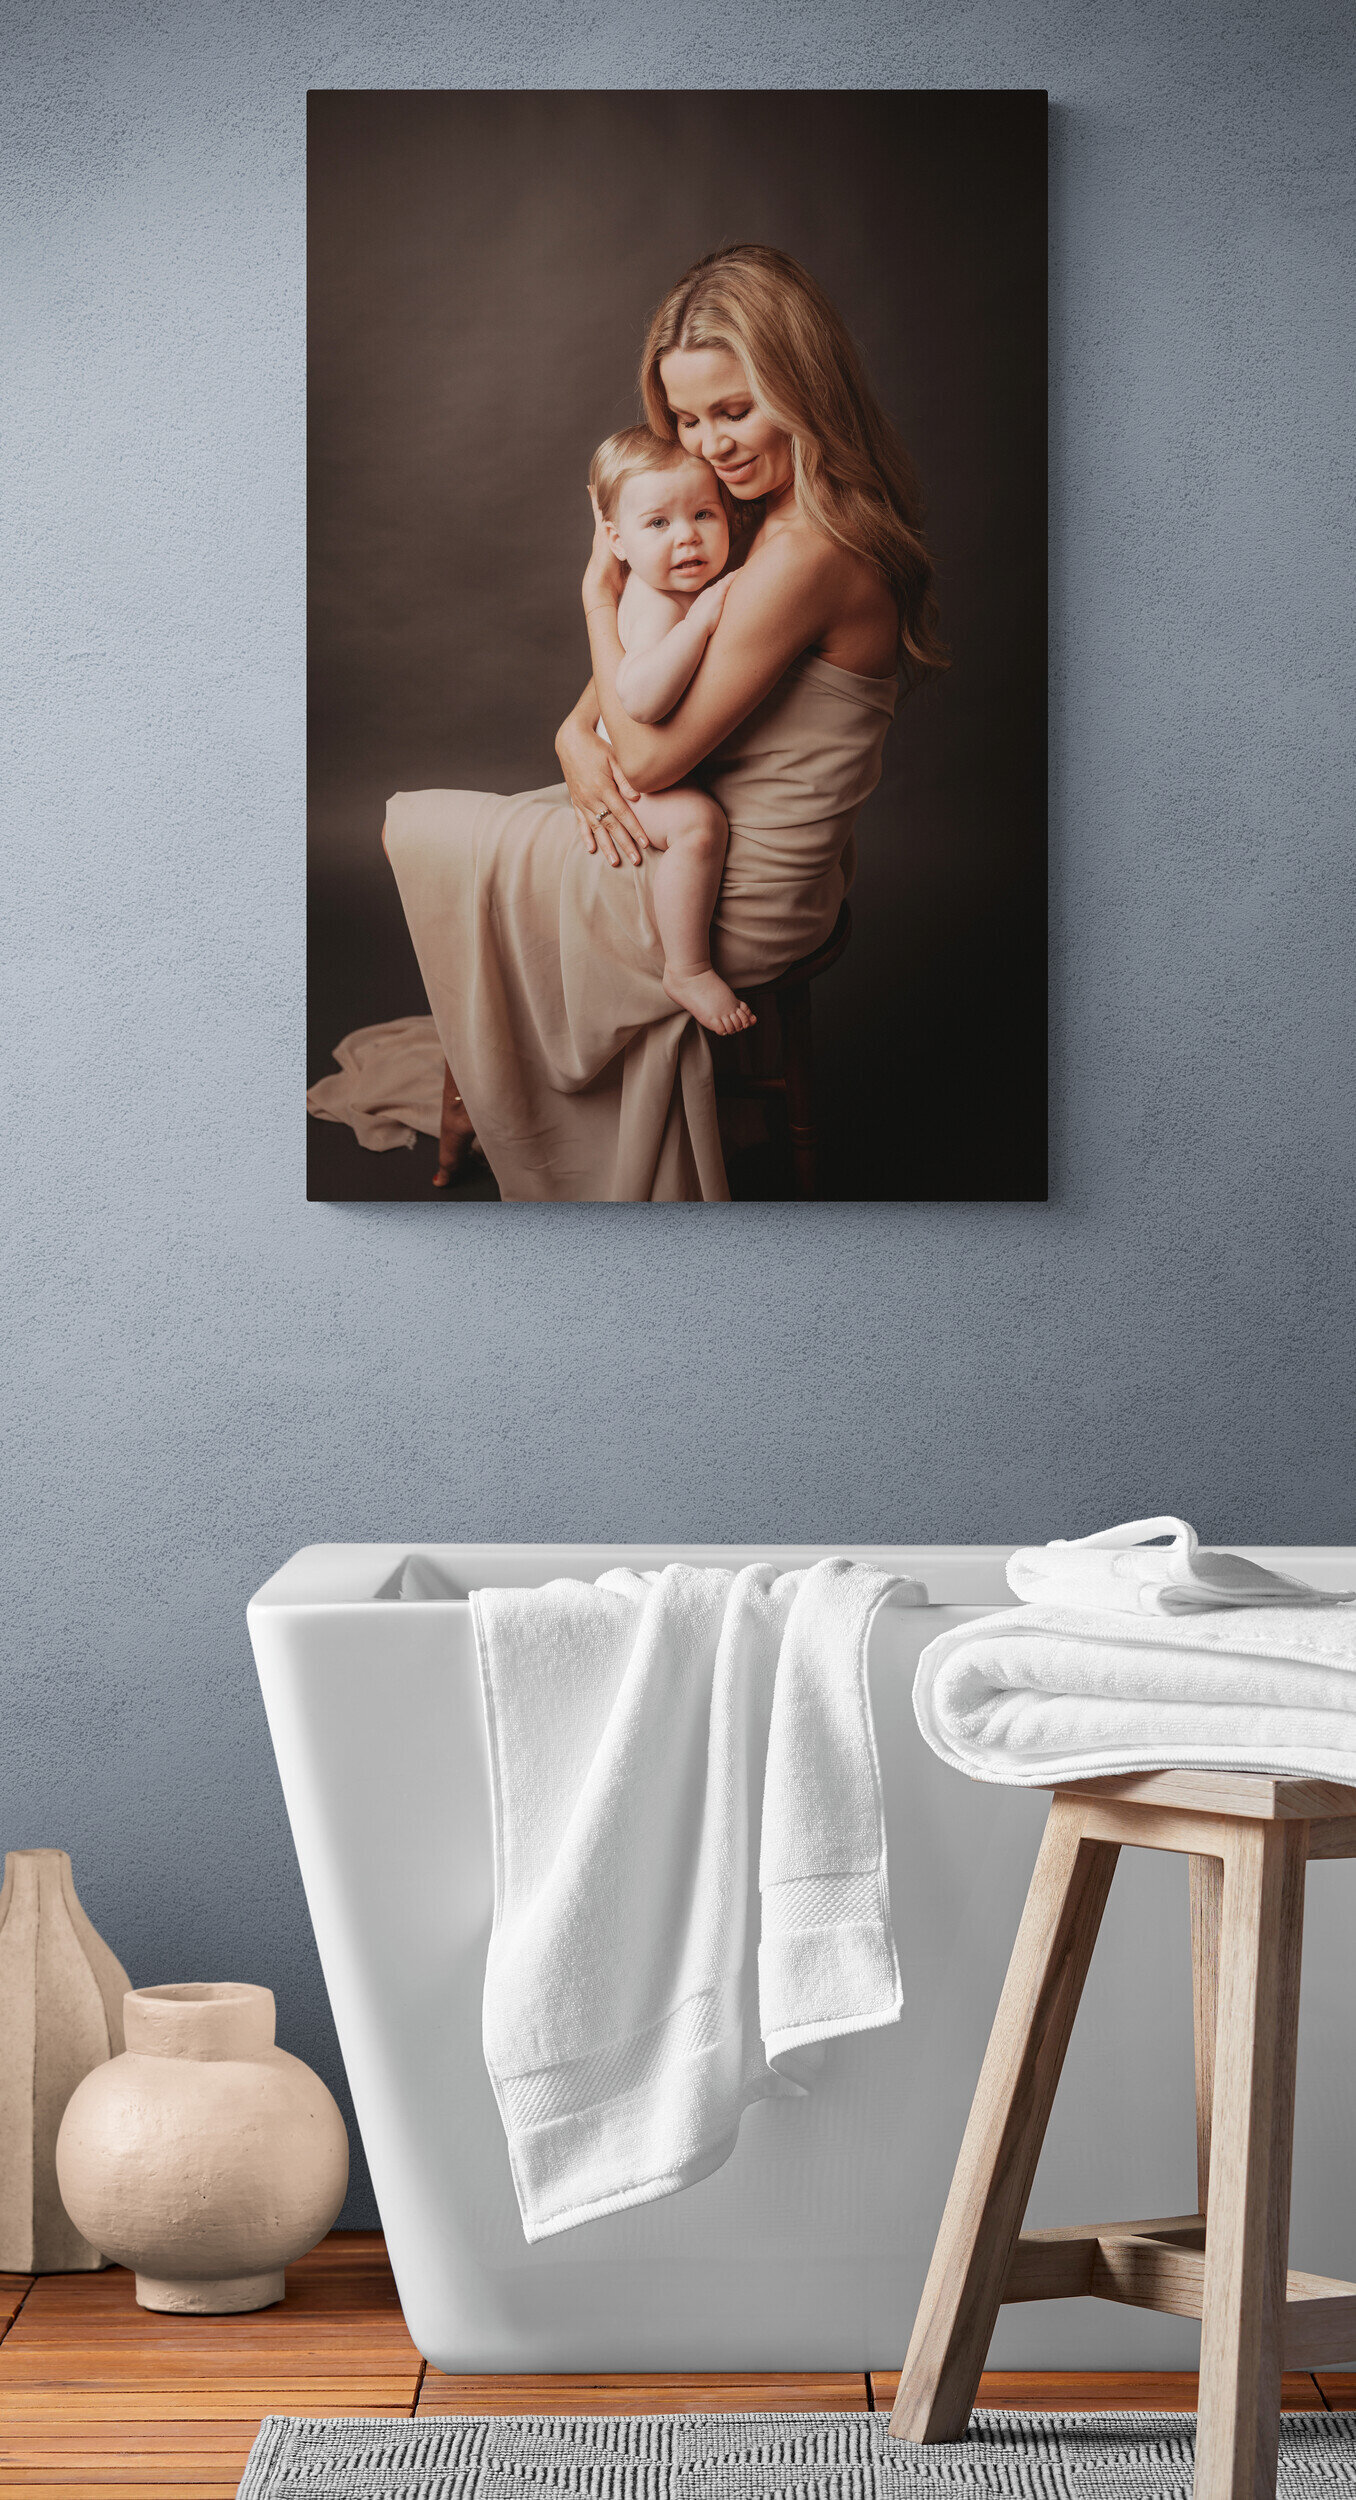 Large photographic artwork hanging on master bathroom wall above stand alone tub of mom and baby holding each other